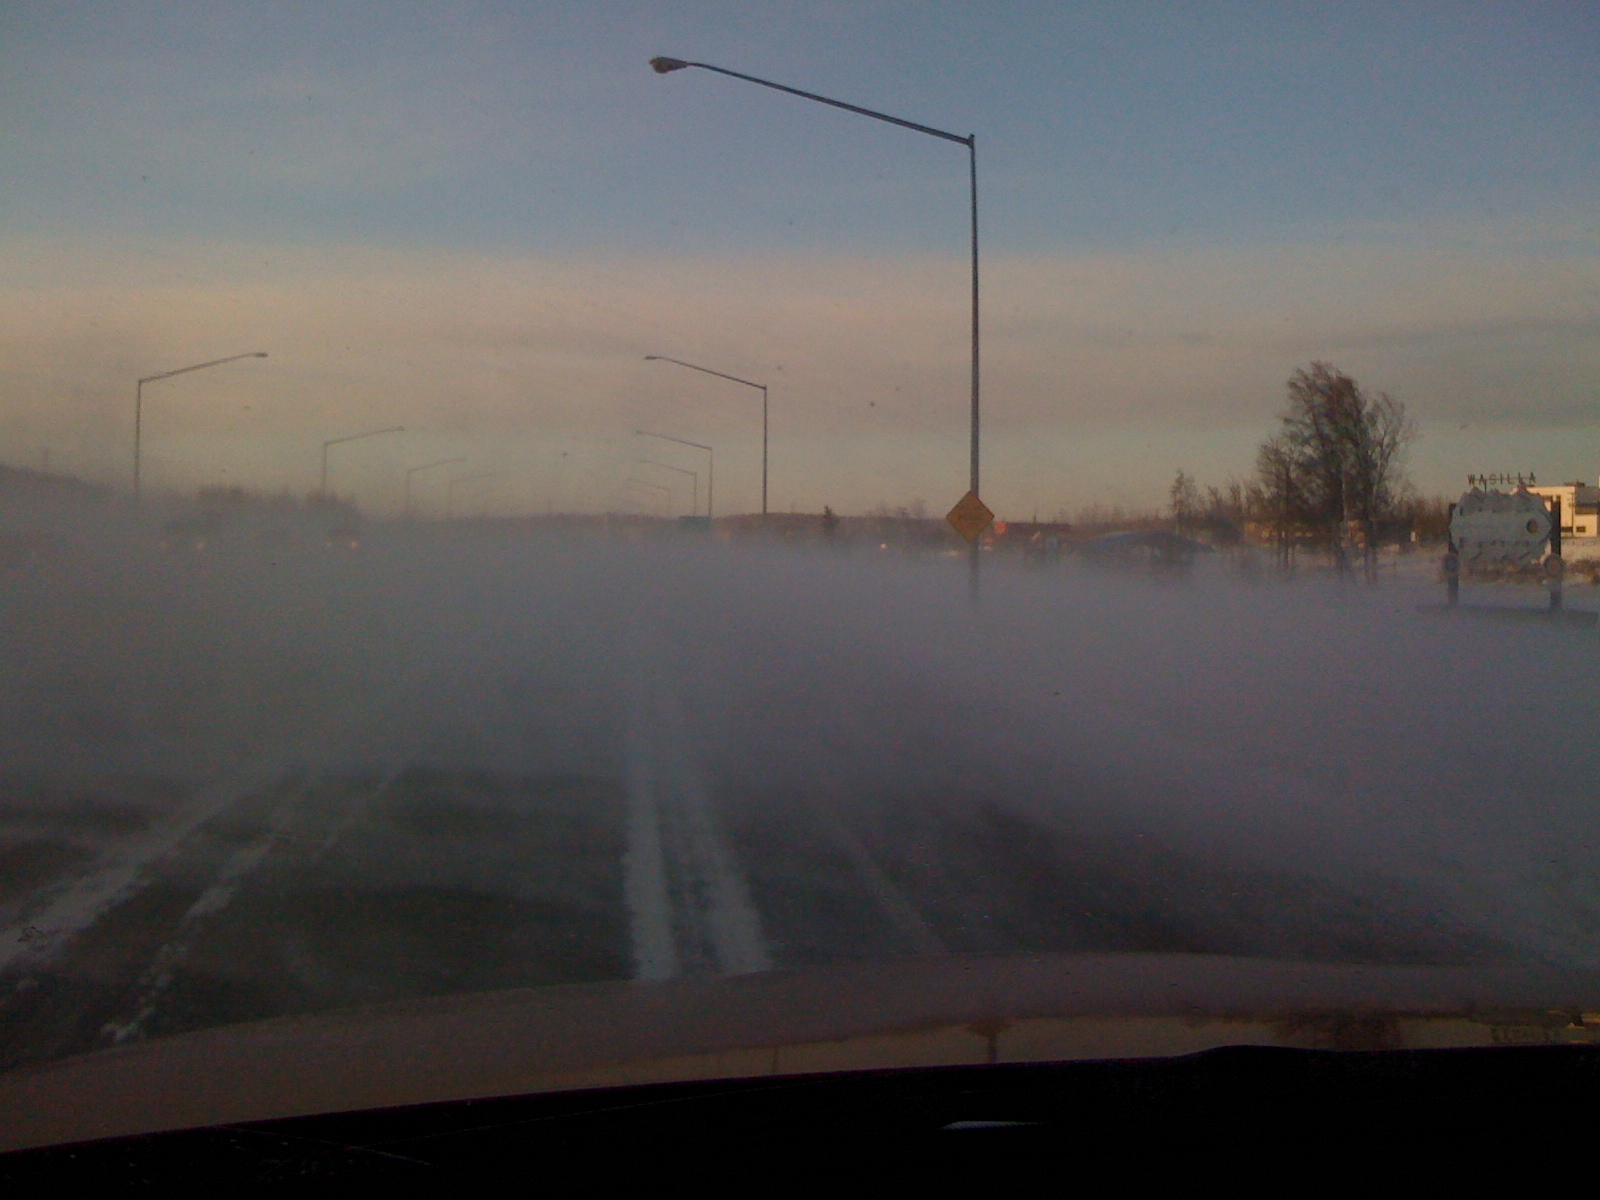 Wasilla, Alaska weather - December 15, 2010 - Can't see road (high winds).